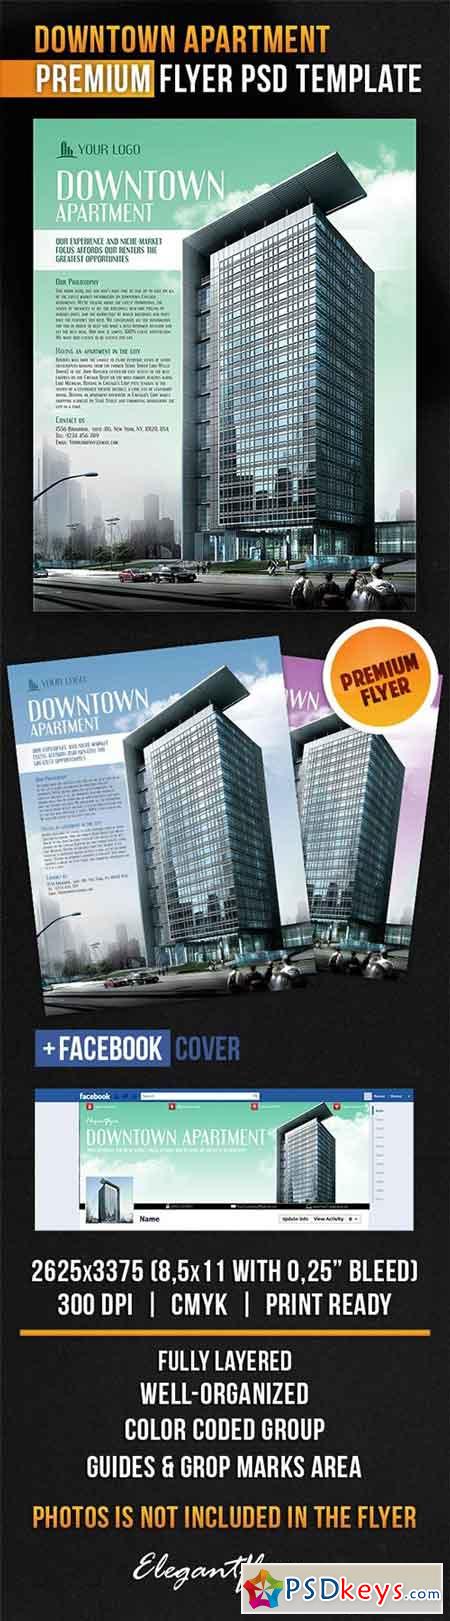 Downtown Apartment Flyer PSD Template + Facebook Cover